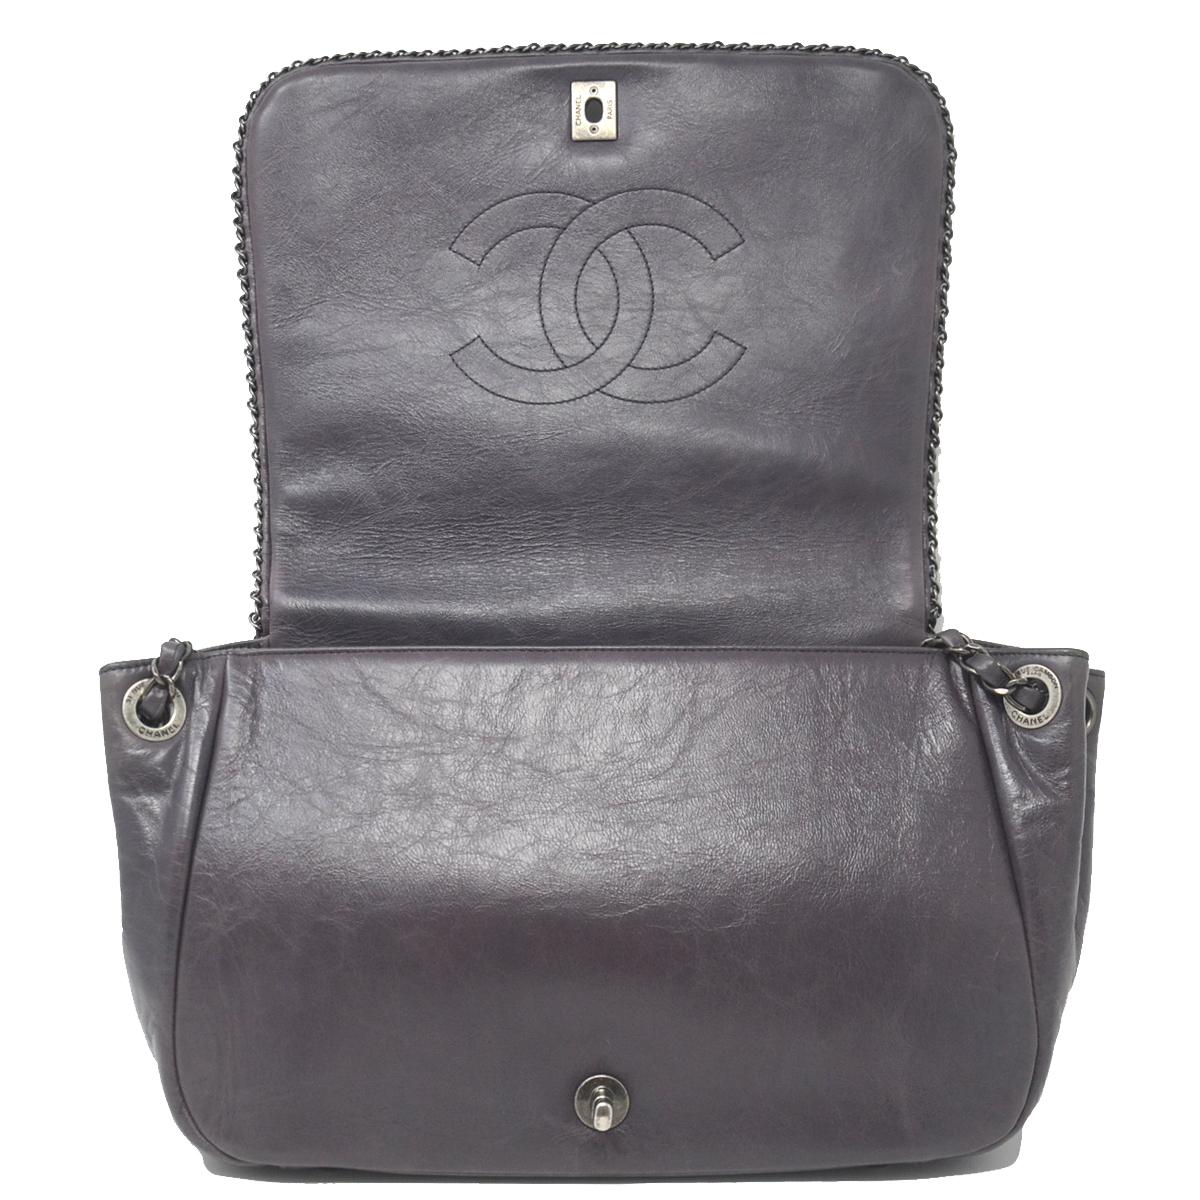 Chanel Chain Around Accordian Purple Quilted Leather Shoulder Bag 2